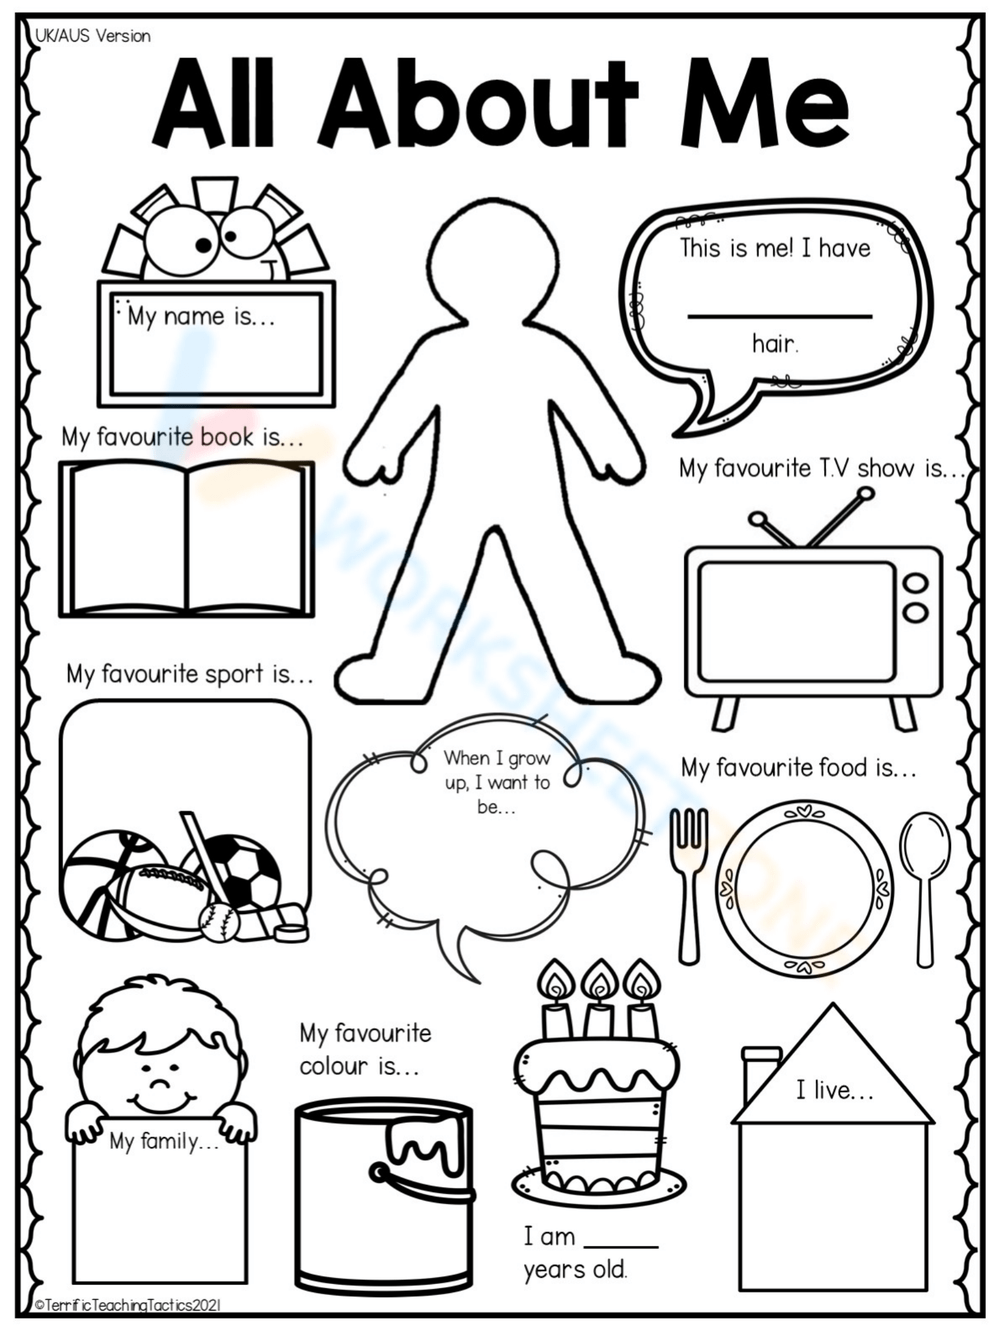 All About Me Worksheet First Day Of School Activity 1691523715168 W1000 H1333 Preview 0 